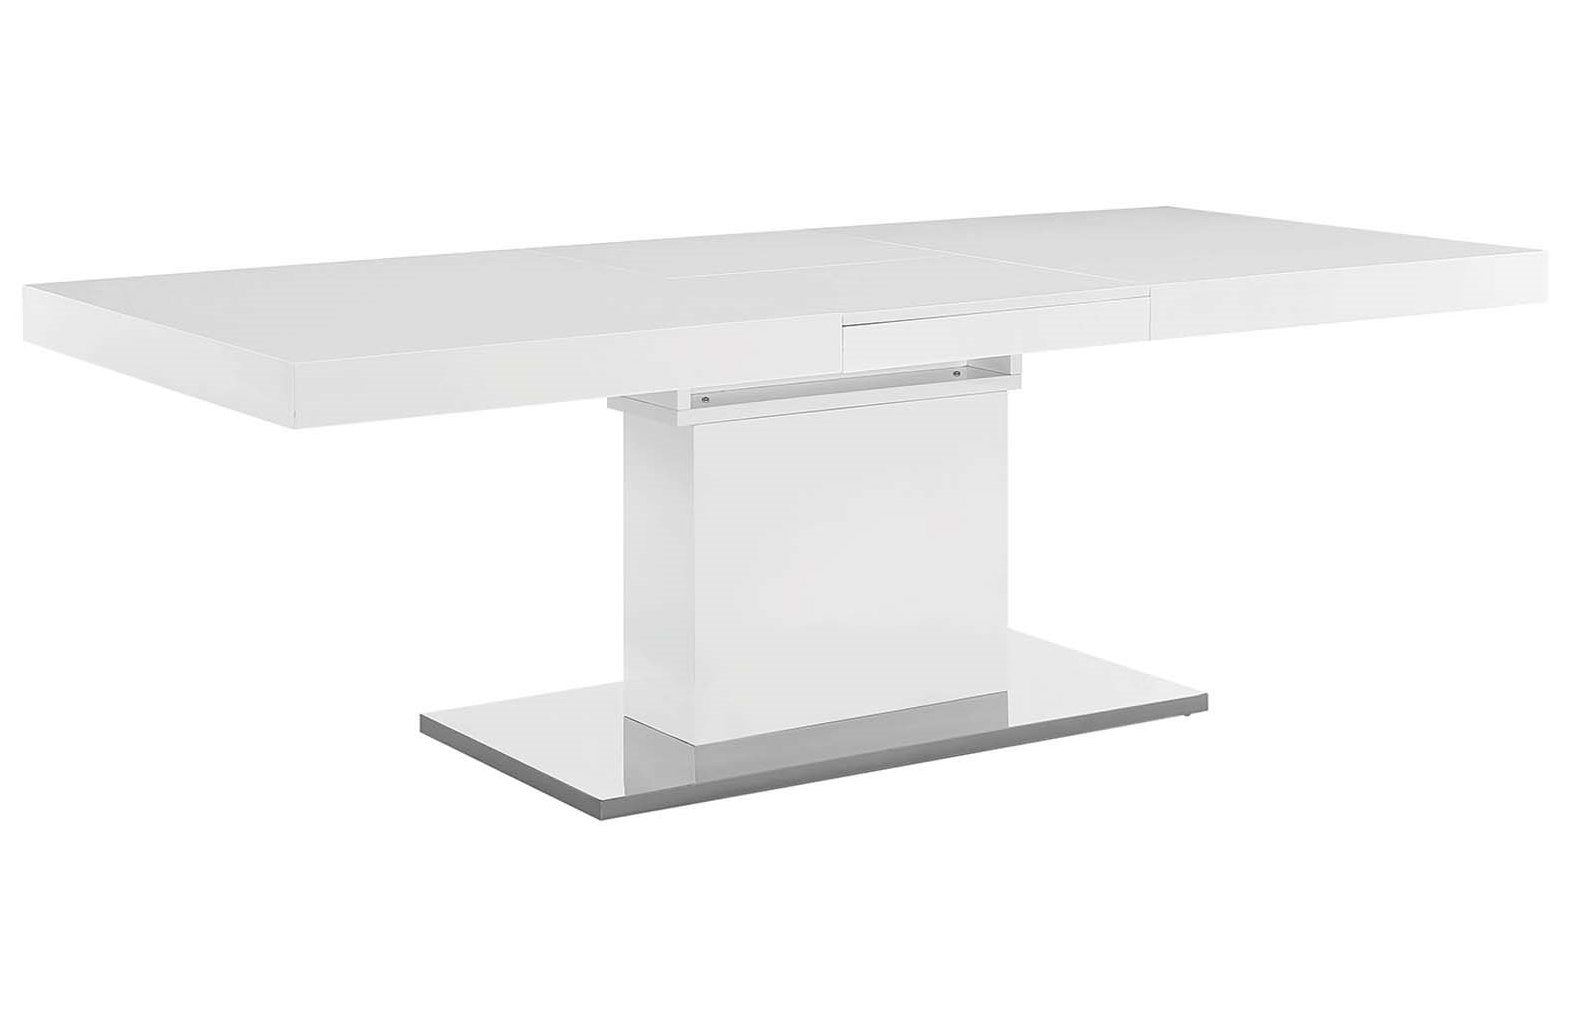 Evens 71"-94" Extendable Dining Table Glossy White